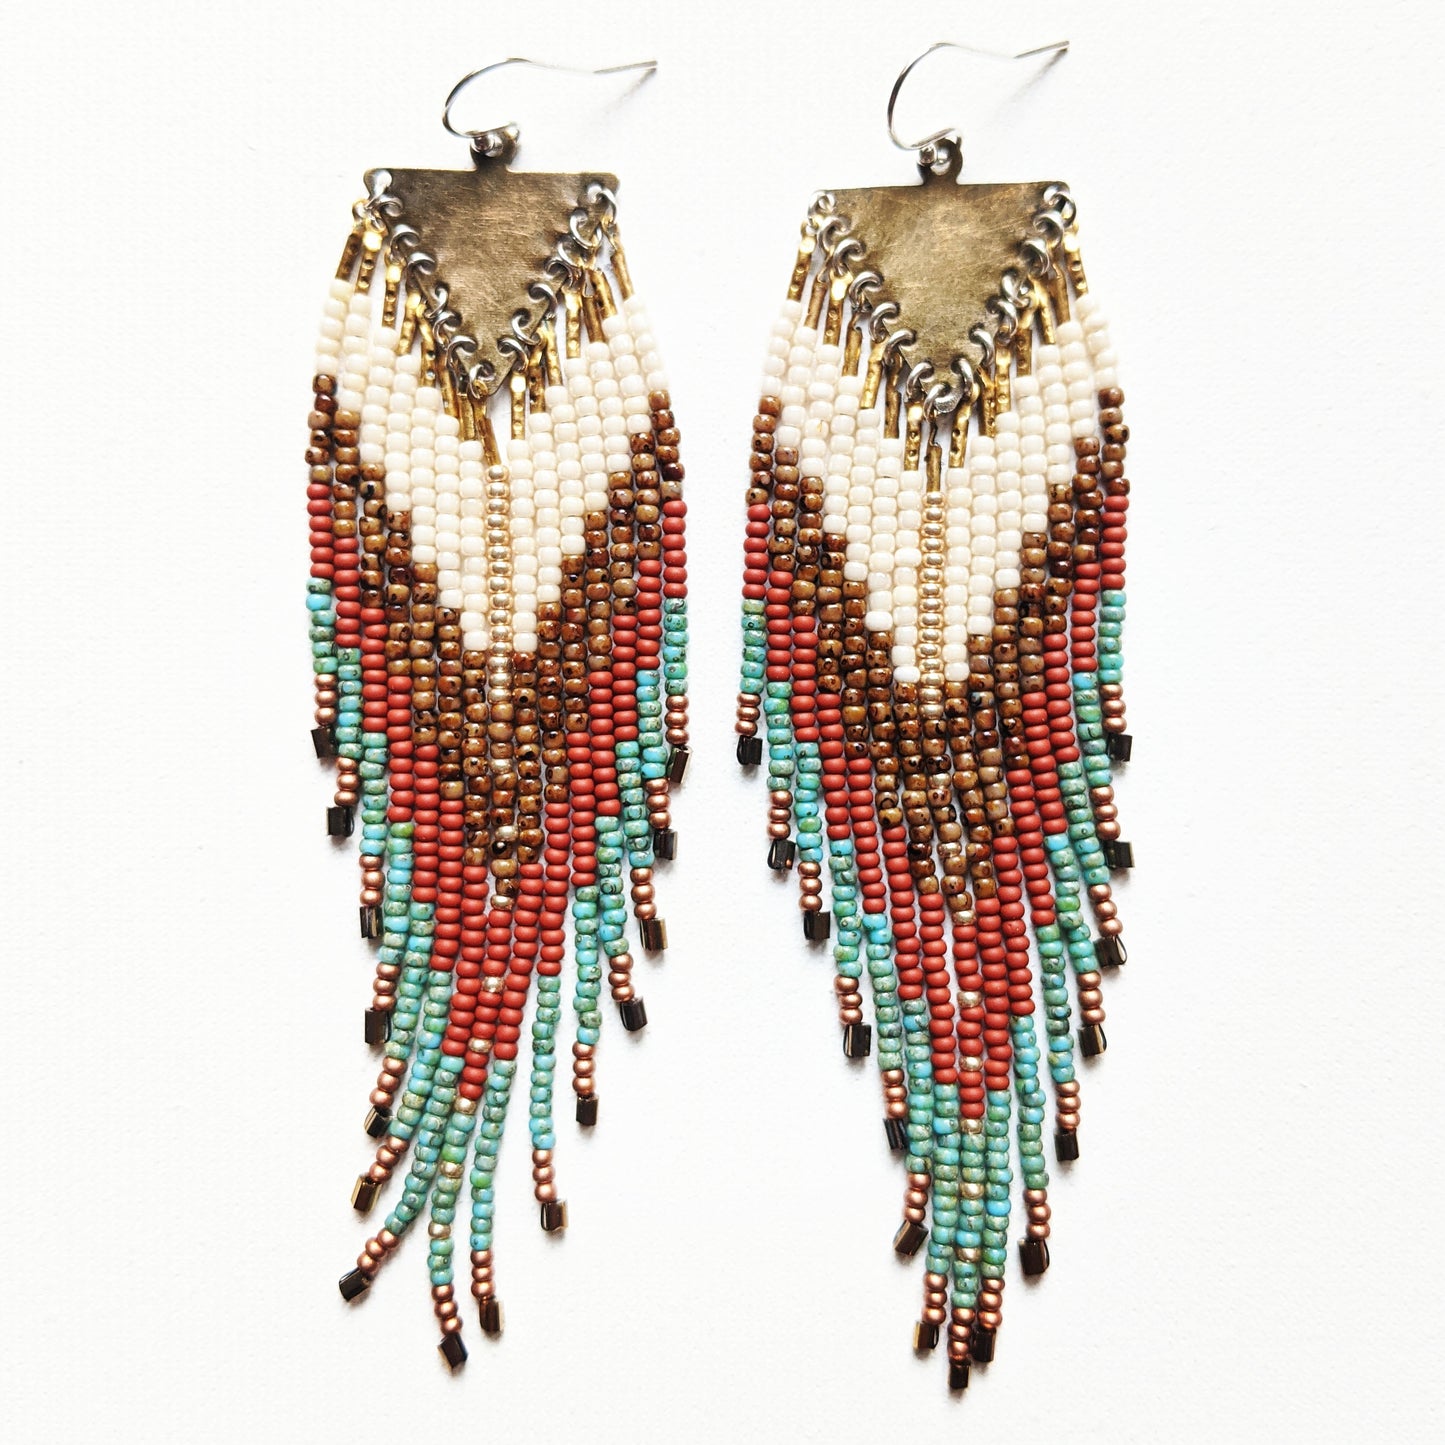 Native American inspired beaded earrings with a terracotta, turquoise, gold, and Picasso brown palette, handmade with glass beads, brass, and sterling silver.